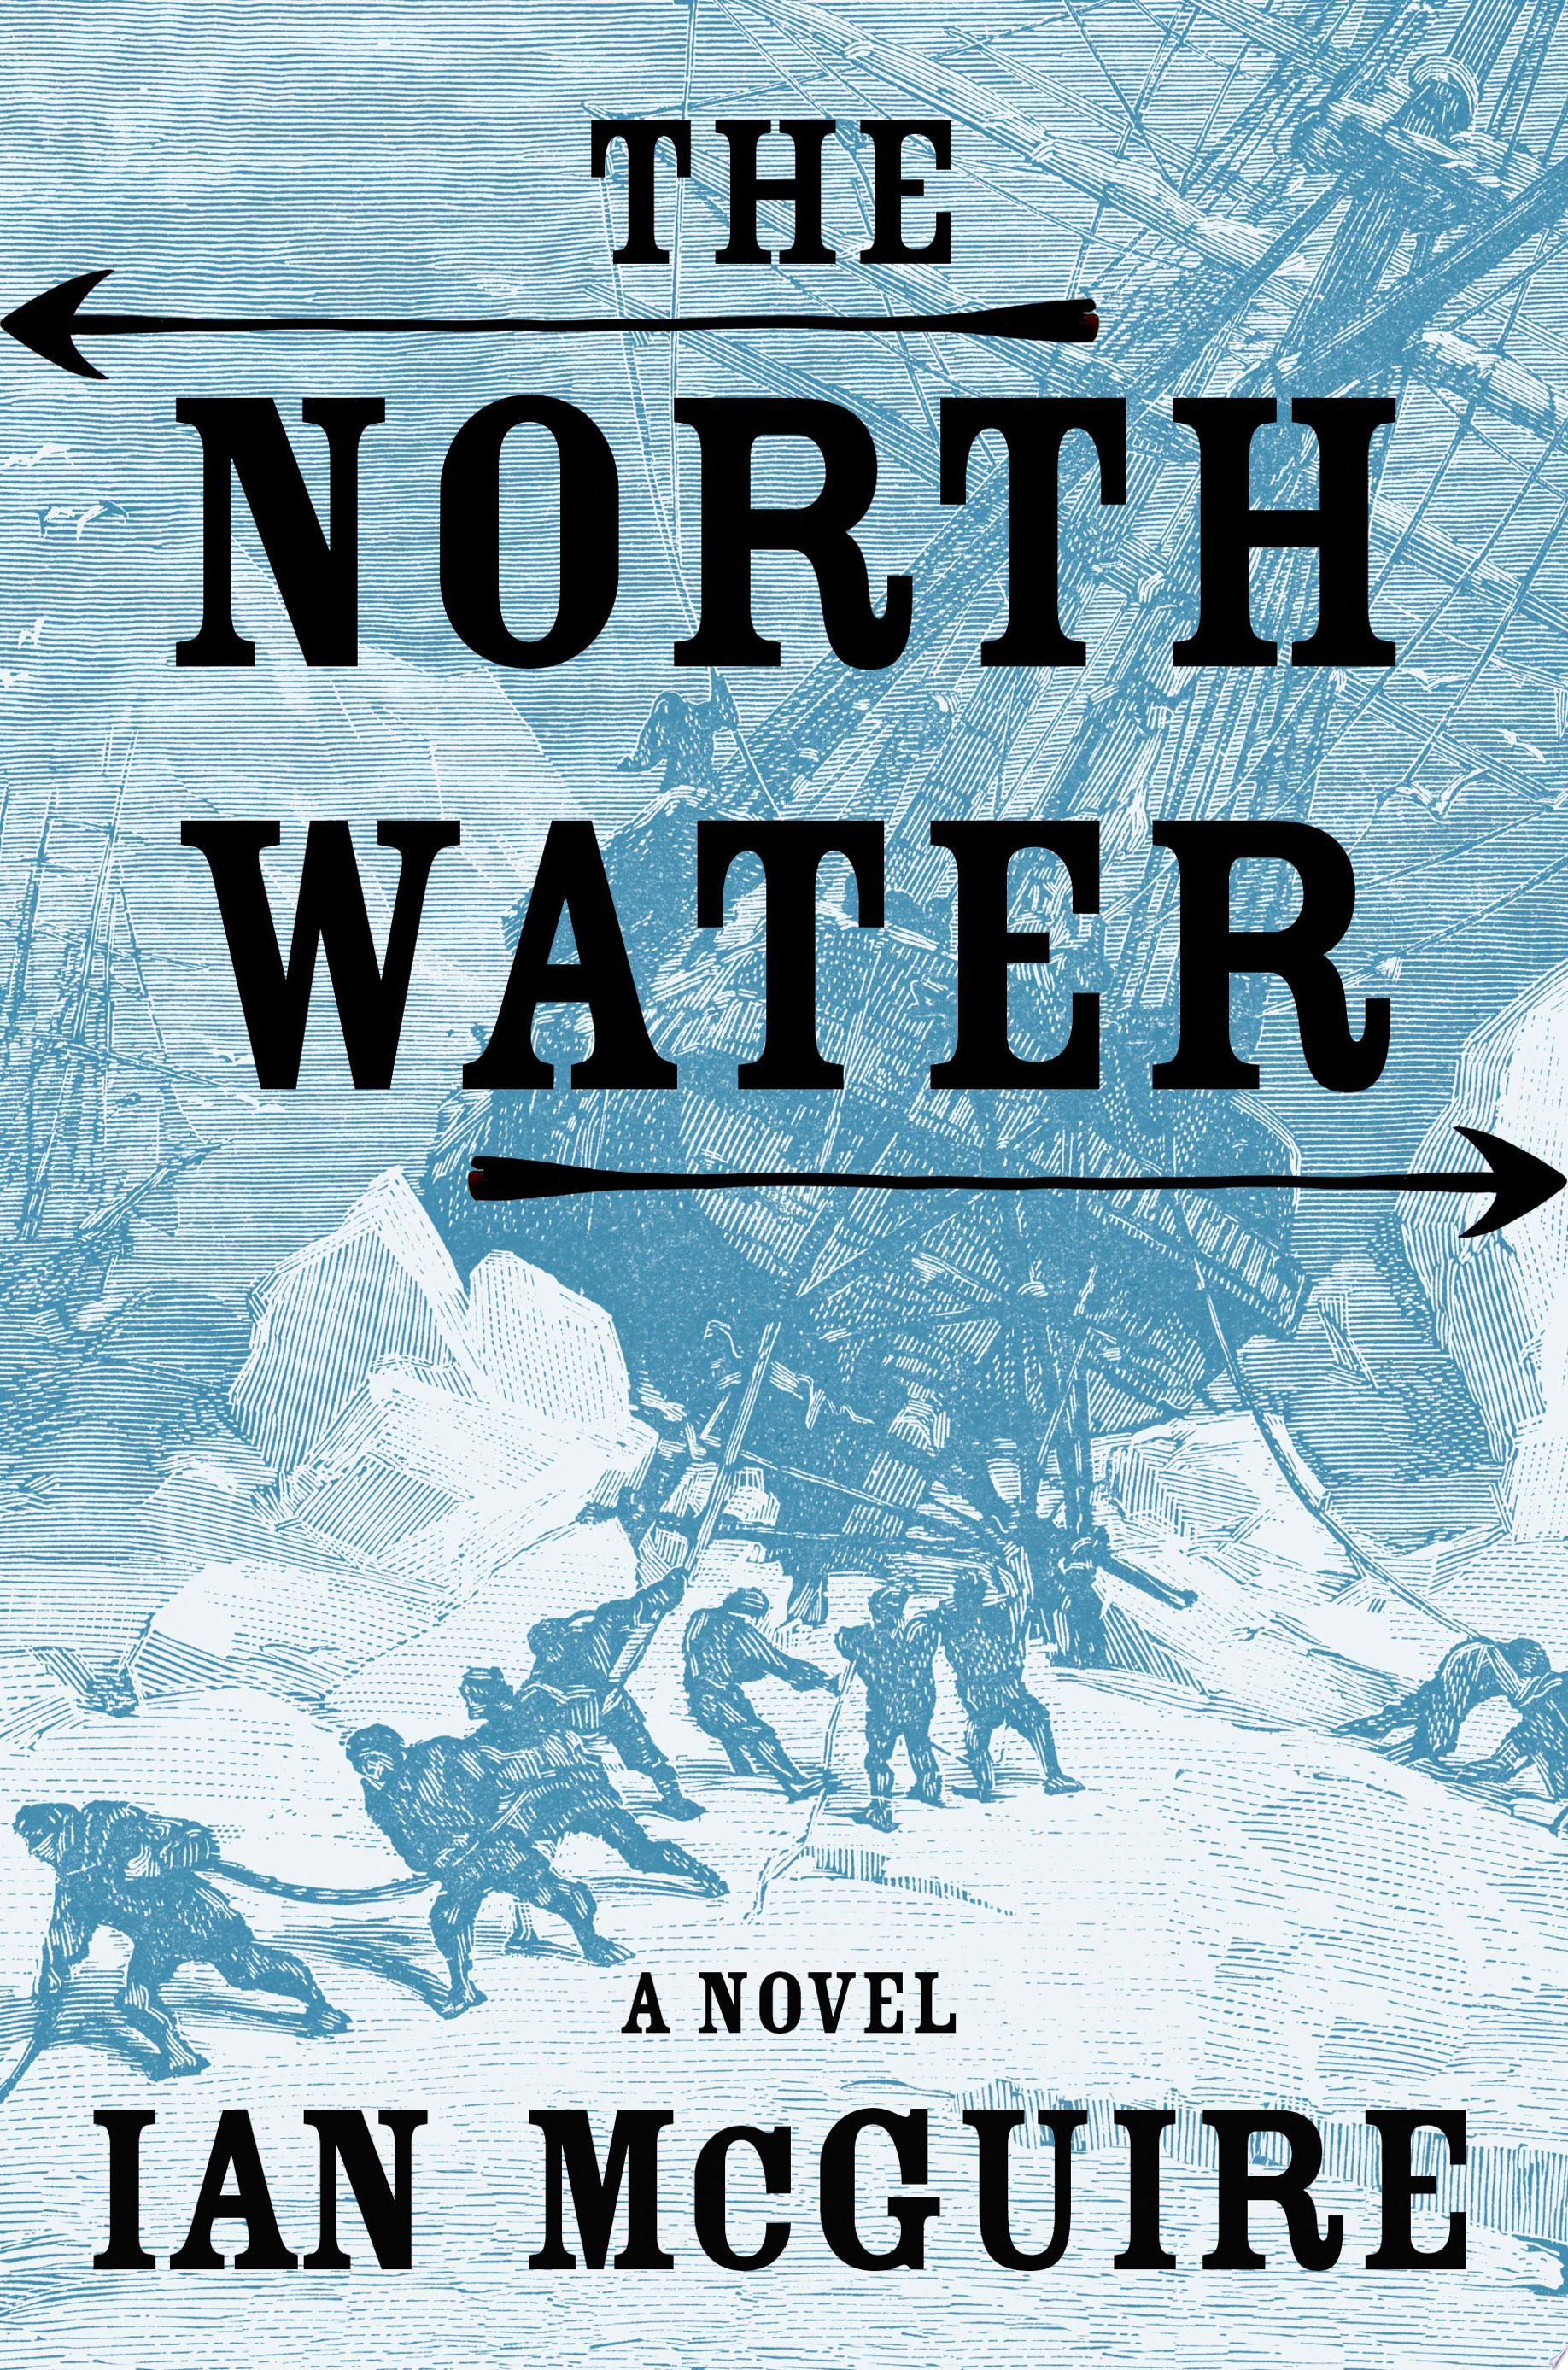 Image for "The North Water"